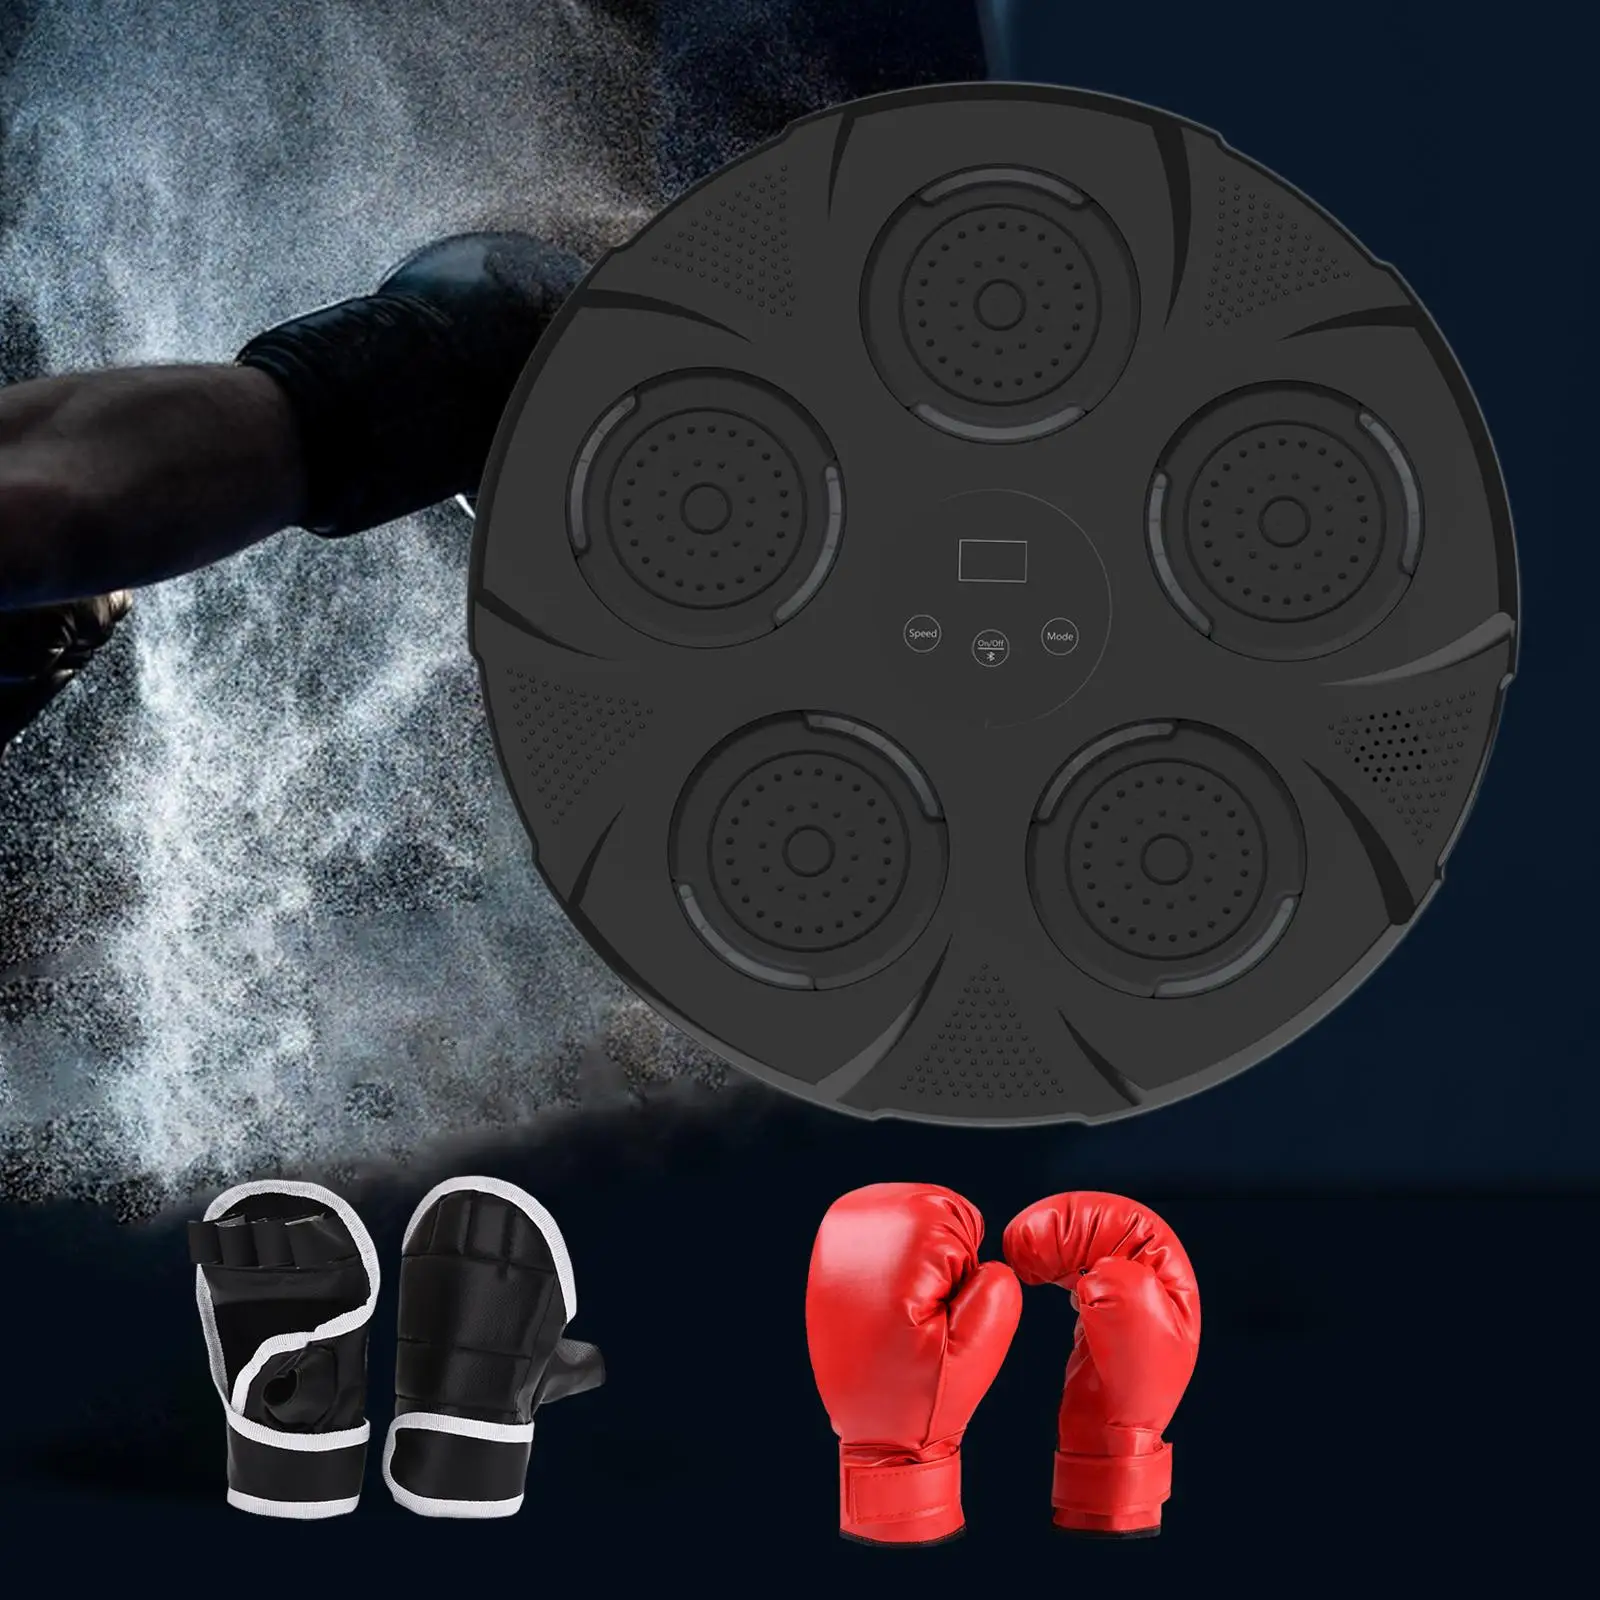 Music Boxing Machine Speed Adjustable Punching Pad for Focus Reaction Home